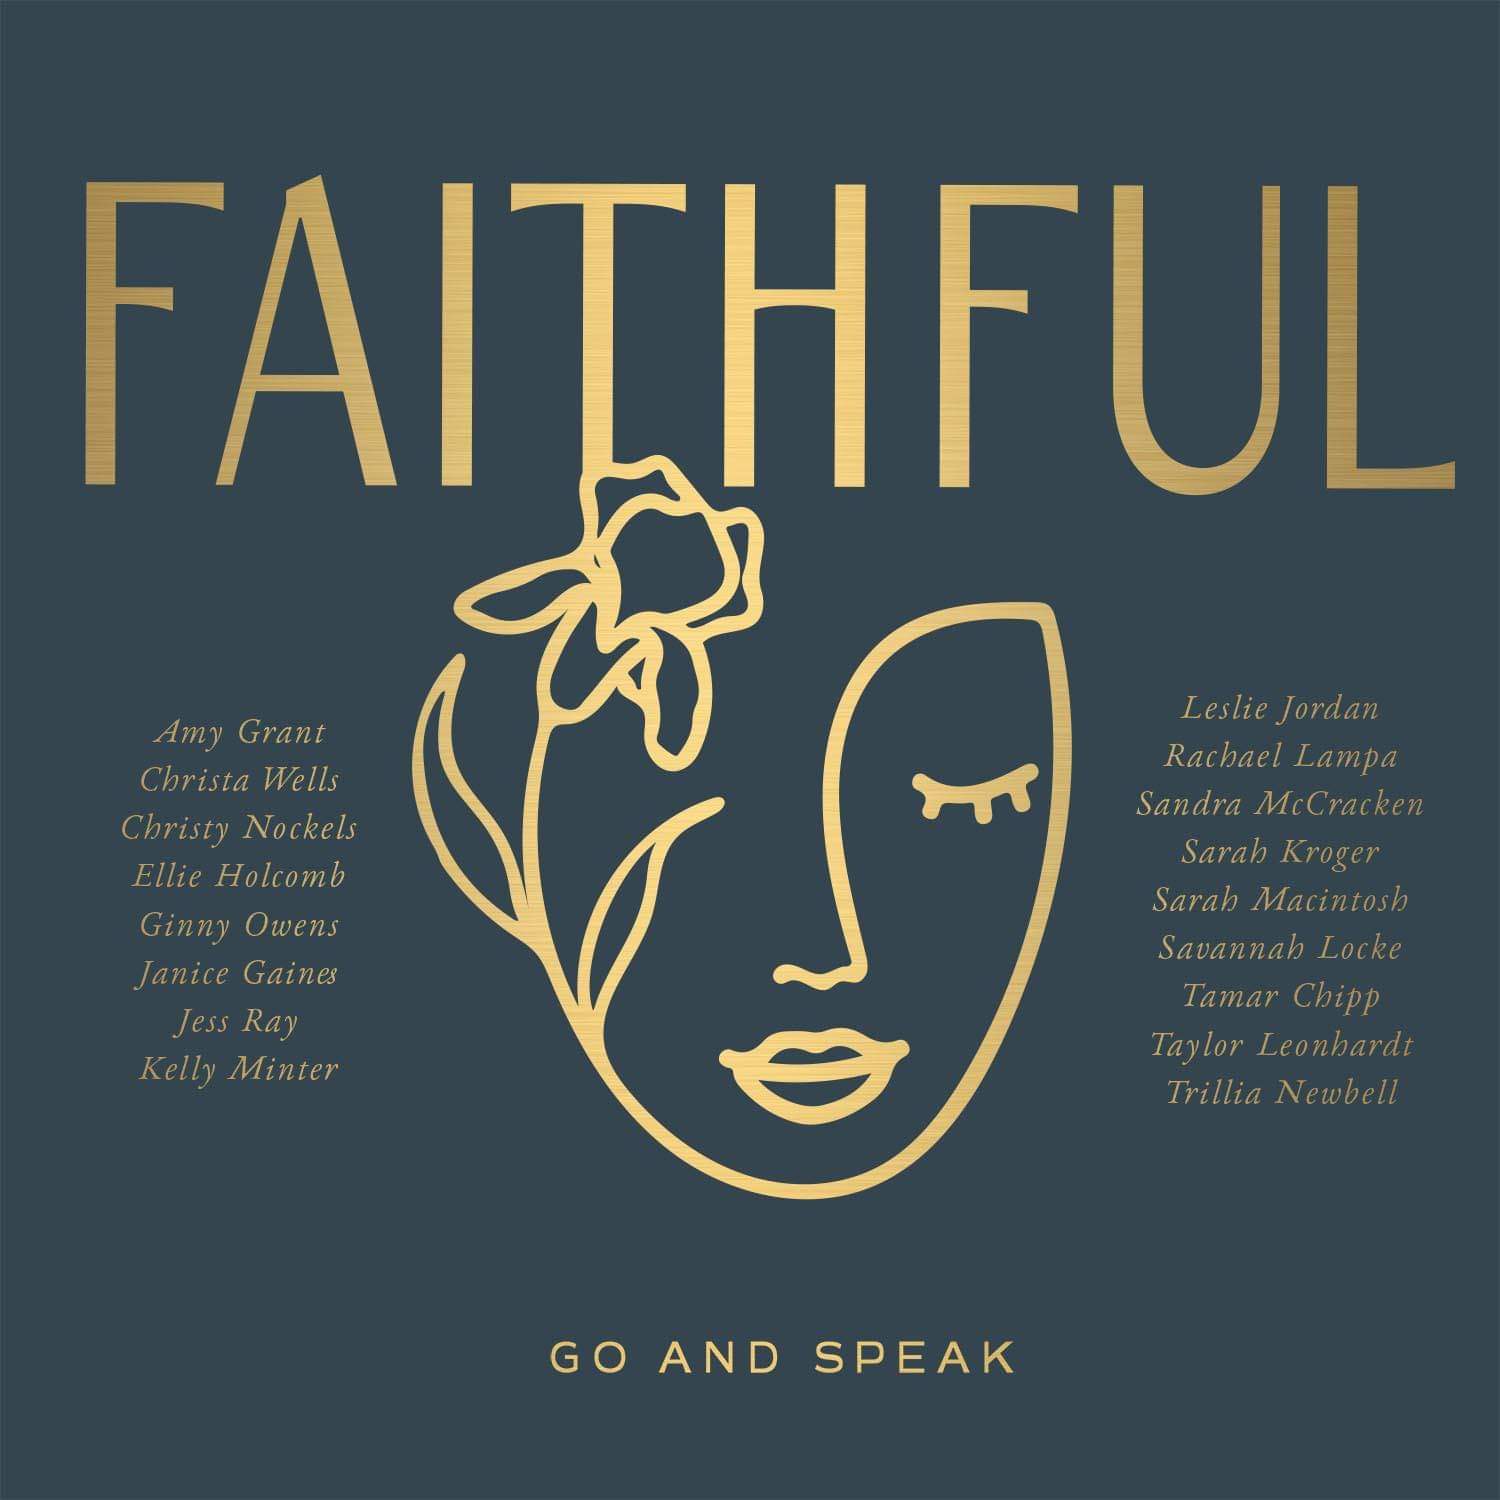 FAITHFUL Project - A Collaborative Book, Album, Livestream Event - Set To Release This May With David C Cook, Integrity Music, And Compassion